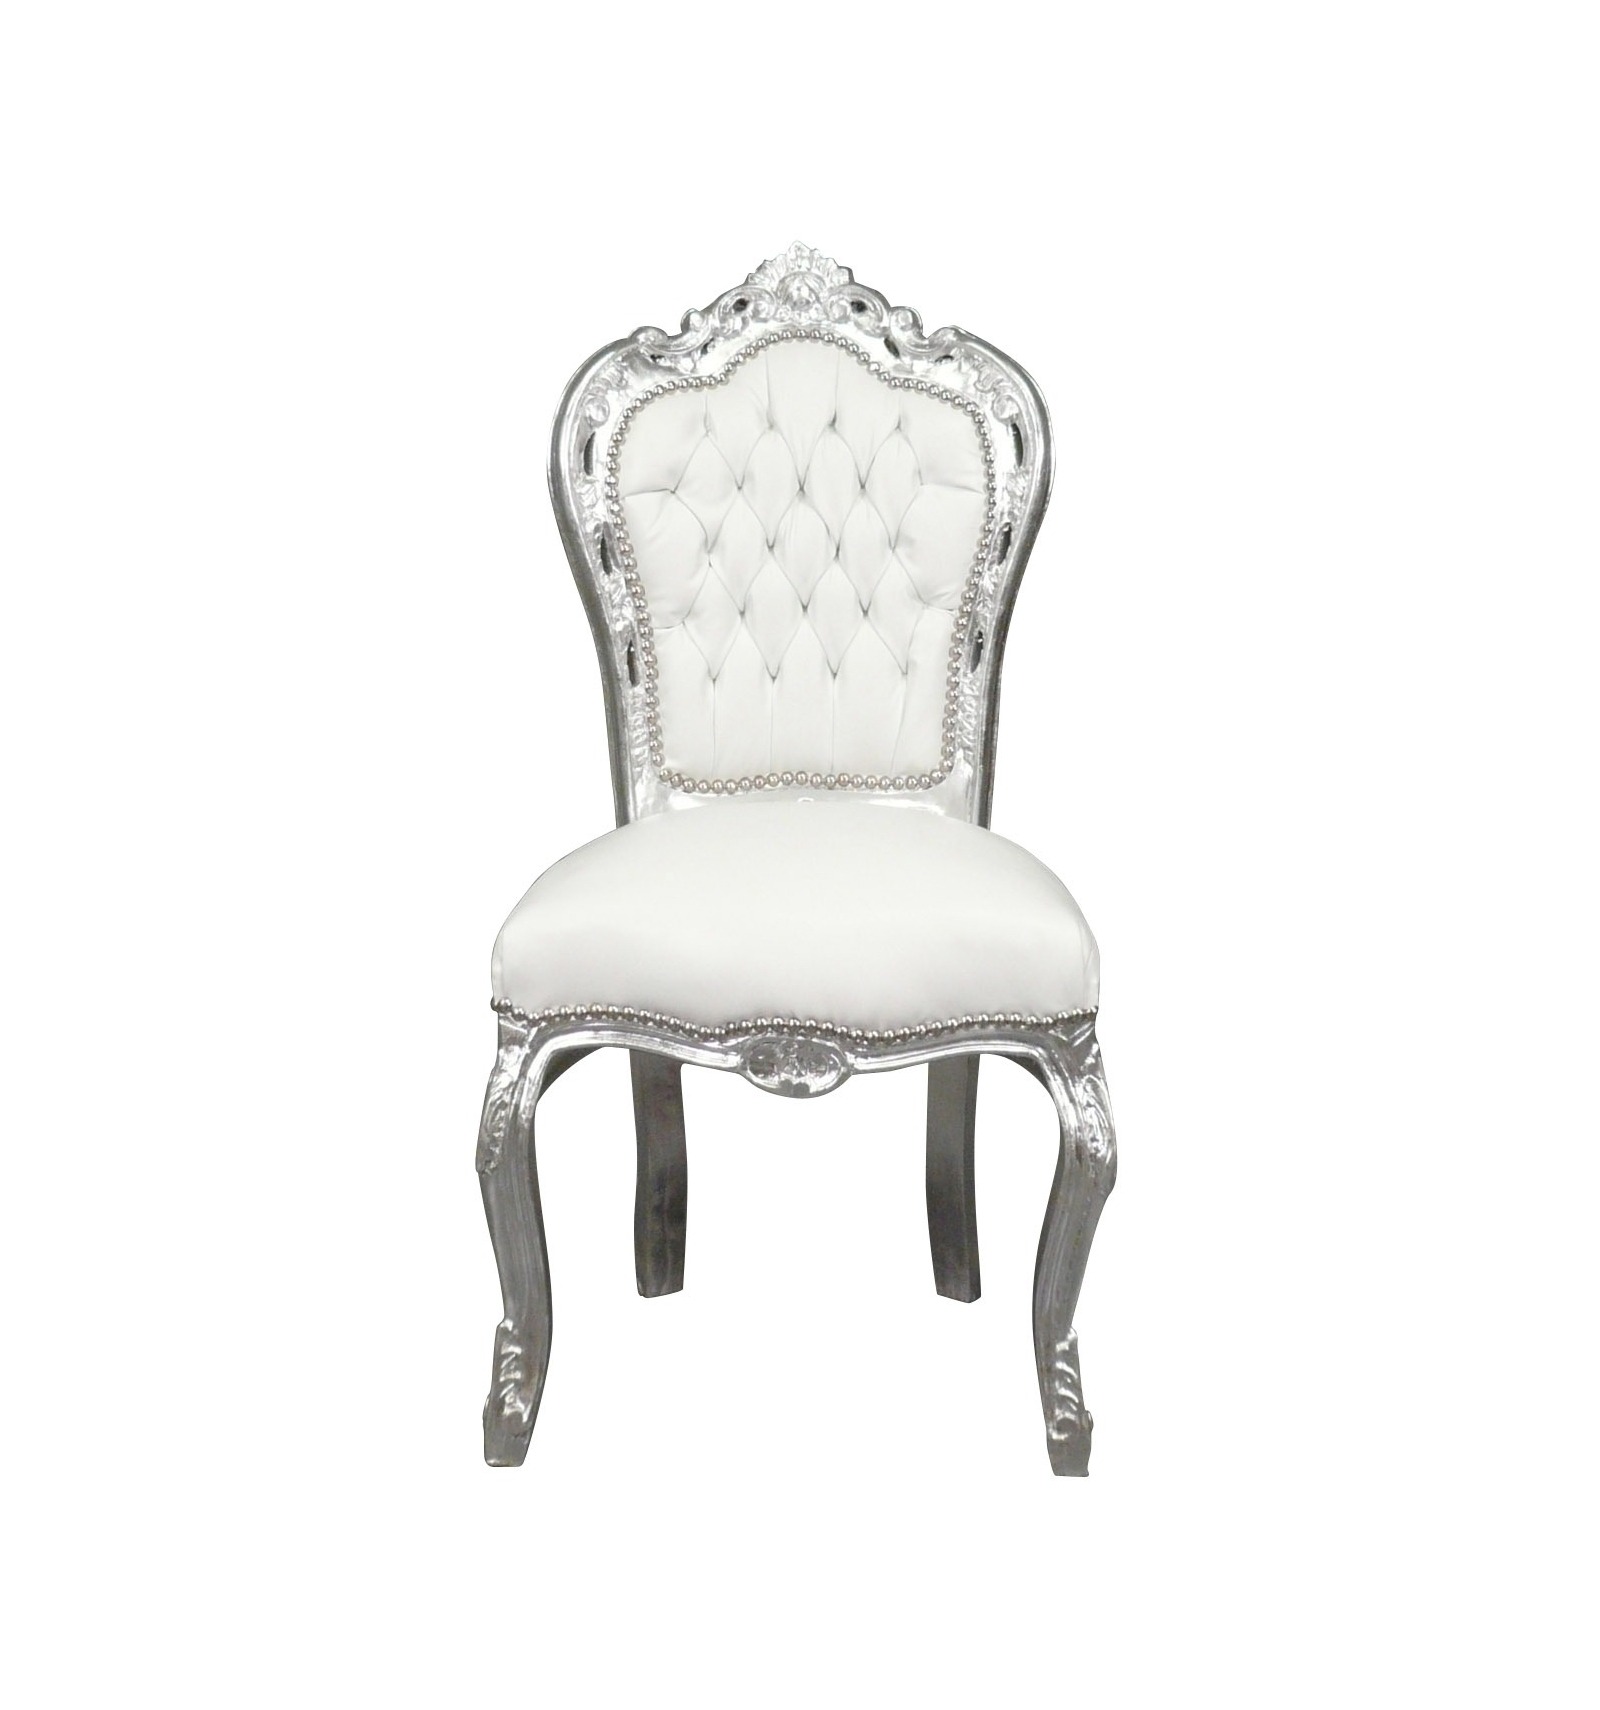 afbreken Golven Spanje White Baroque Chair - Baroque Chairs and Style Furniture on Sale